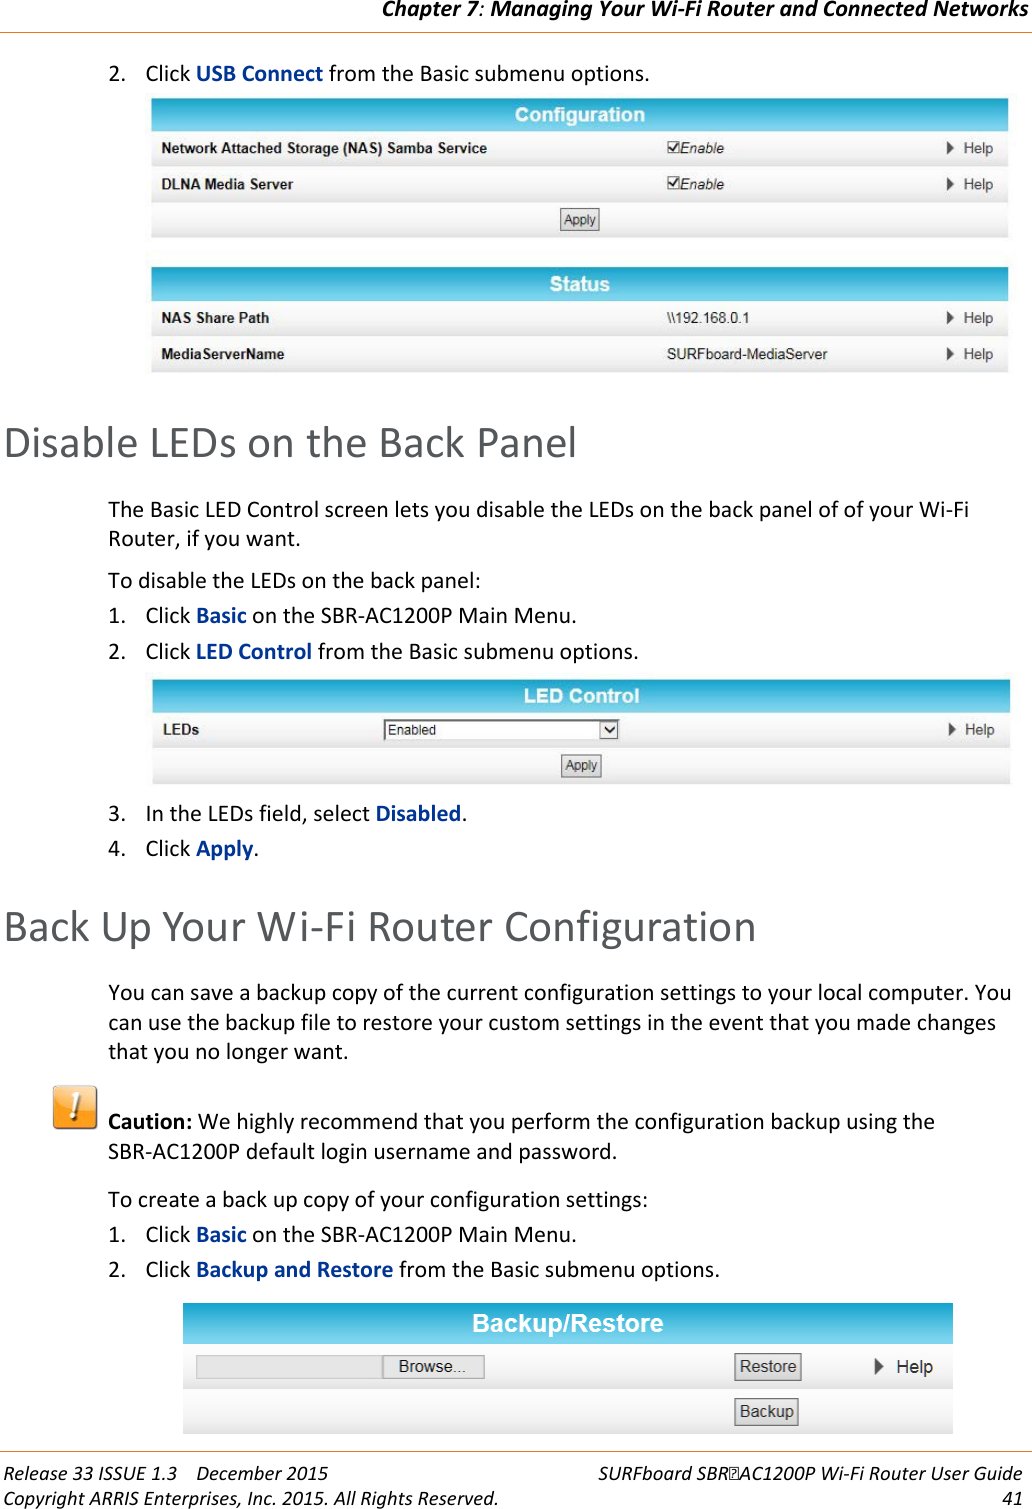 Chapter 7: Managing Your Wi-Fi Router and Connected Networks  Release 33 ISSUE 1.3    December 2015 SURFboard SBRAC1200P Wi-Fi Router User Guide Copyright ARRIS Enterprises, Inc. 2015. All Rights Reserved. 41  2. Click USB Connect from the Basic submenu options.    Disable LEDs on the Back Panel The Basic LED Control screen lets you disable the LEDs on the back panel of of your Wi-Fi Router, if you want. To disable the LEDs on the back panel: 1. Click Basic on the SBR-AC1200P Main Menu. 2. Click LED Control from the Basic submenu options.  3. In the LEDs field, select Disabled. 4. Click Apply.   Back Up Your Wi-Fi Router Configuration You can save a backup copy of the current configuration settings to your local computer. You can use the backup file to restore your custom settings in the event that you made changes that you no longer want.   Caution: We highly recommend that you perform the configuration backup using the SBR-AC1200P default login username and password. To create a back up copy of your configuration settings: 1. Click Basic on the SBR-AC1200P Main Menu. 2. Click Backup and Restore from the Basic submenu options.  